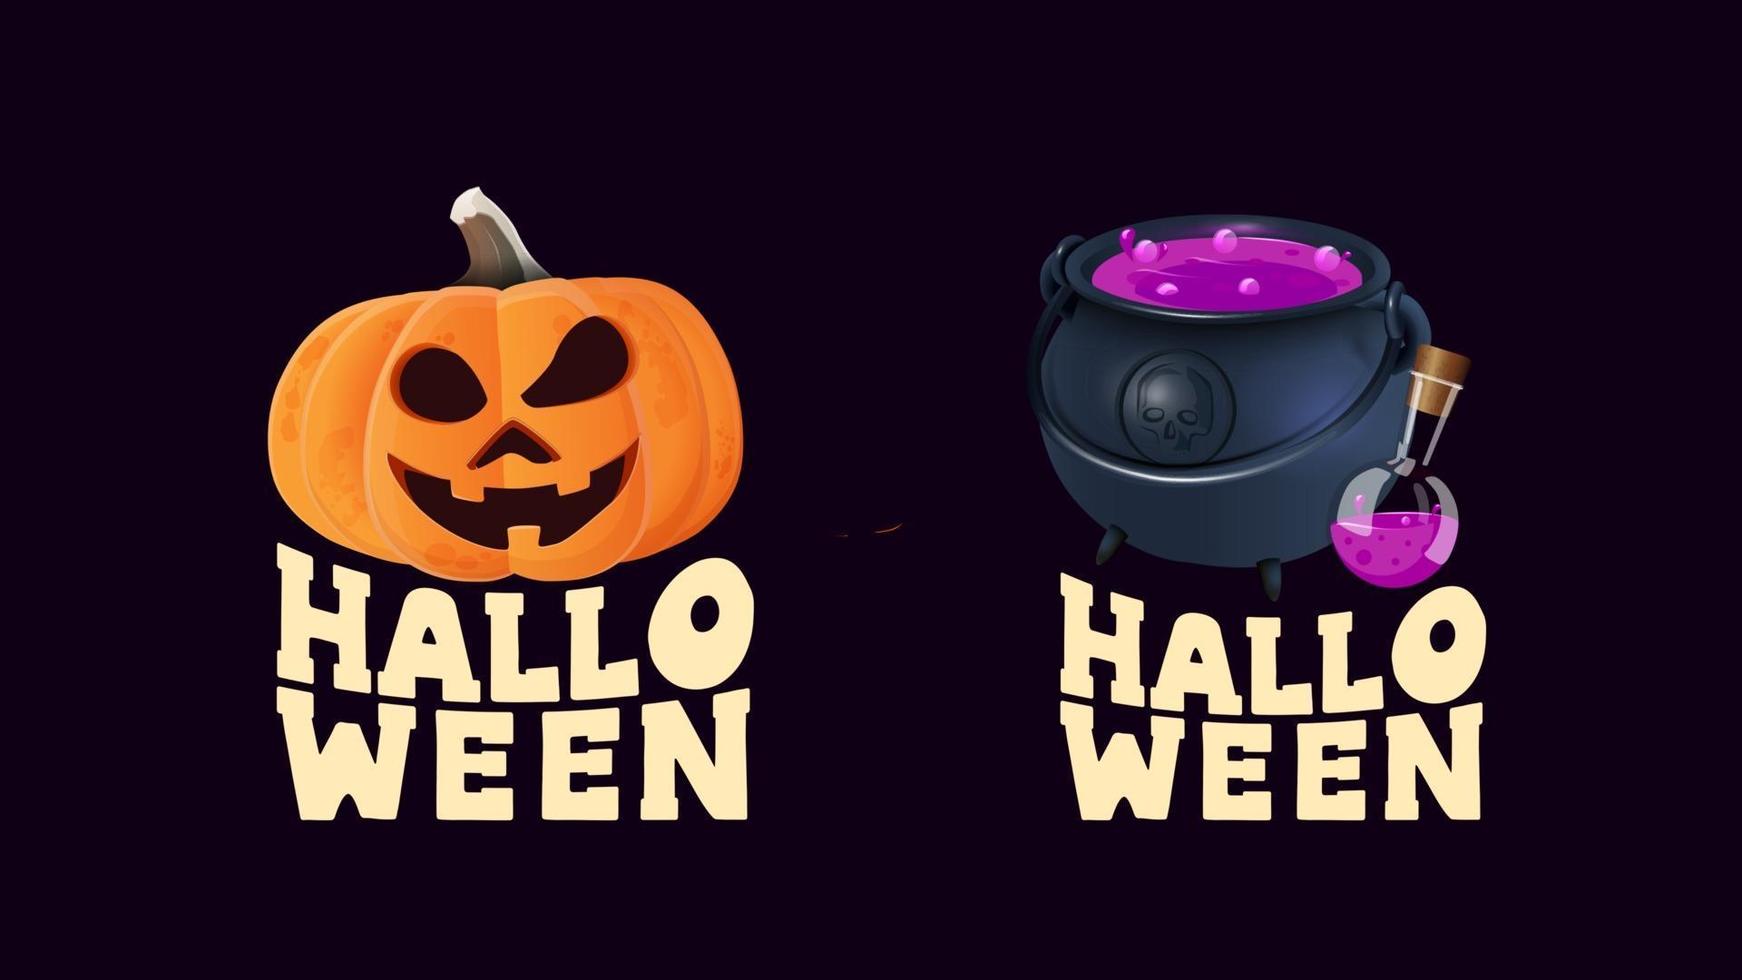 Set Halloween logo with pumpkin and witches cauldron vector